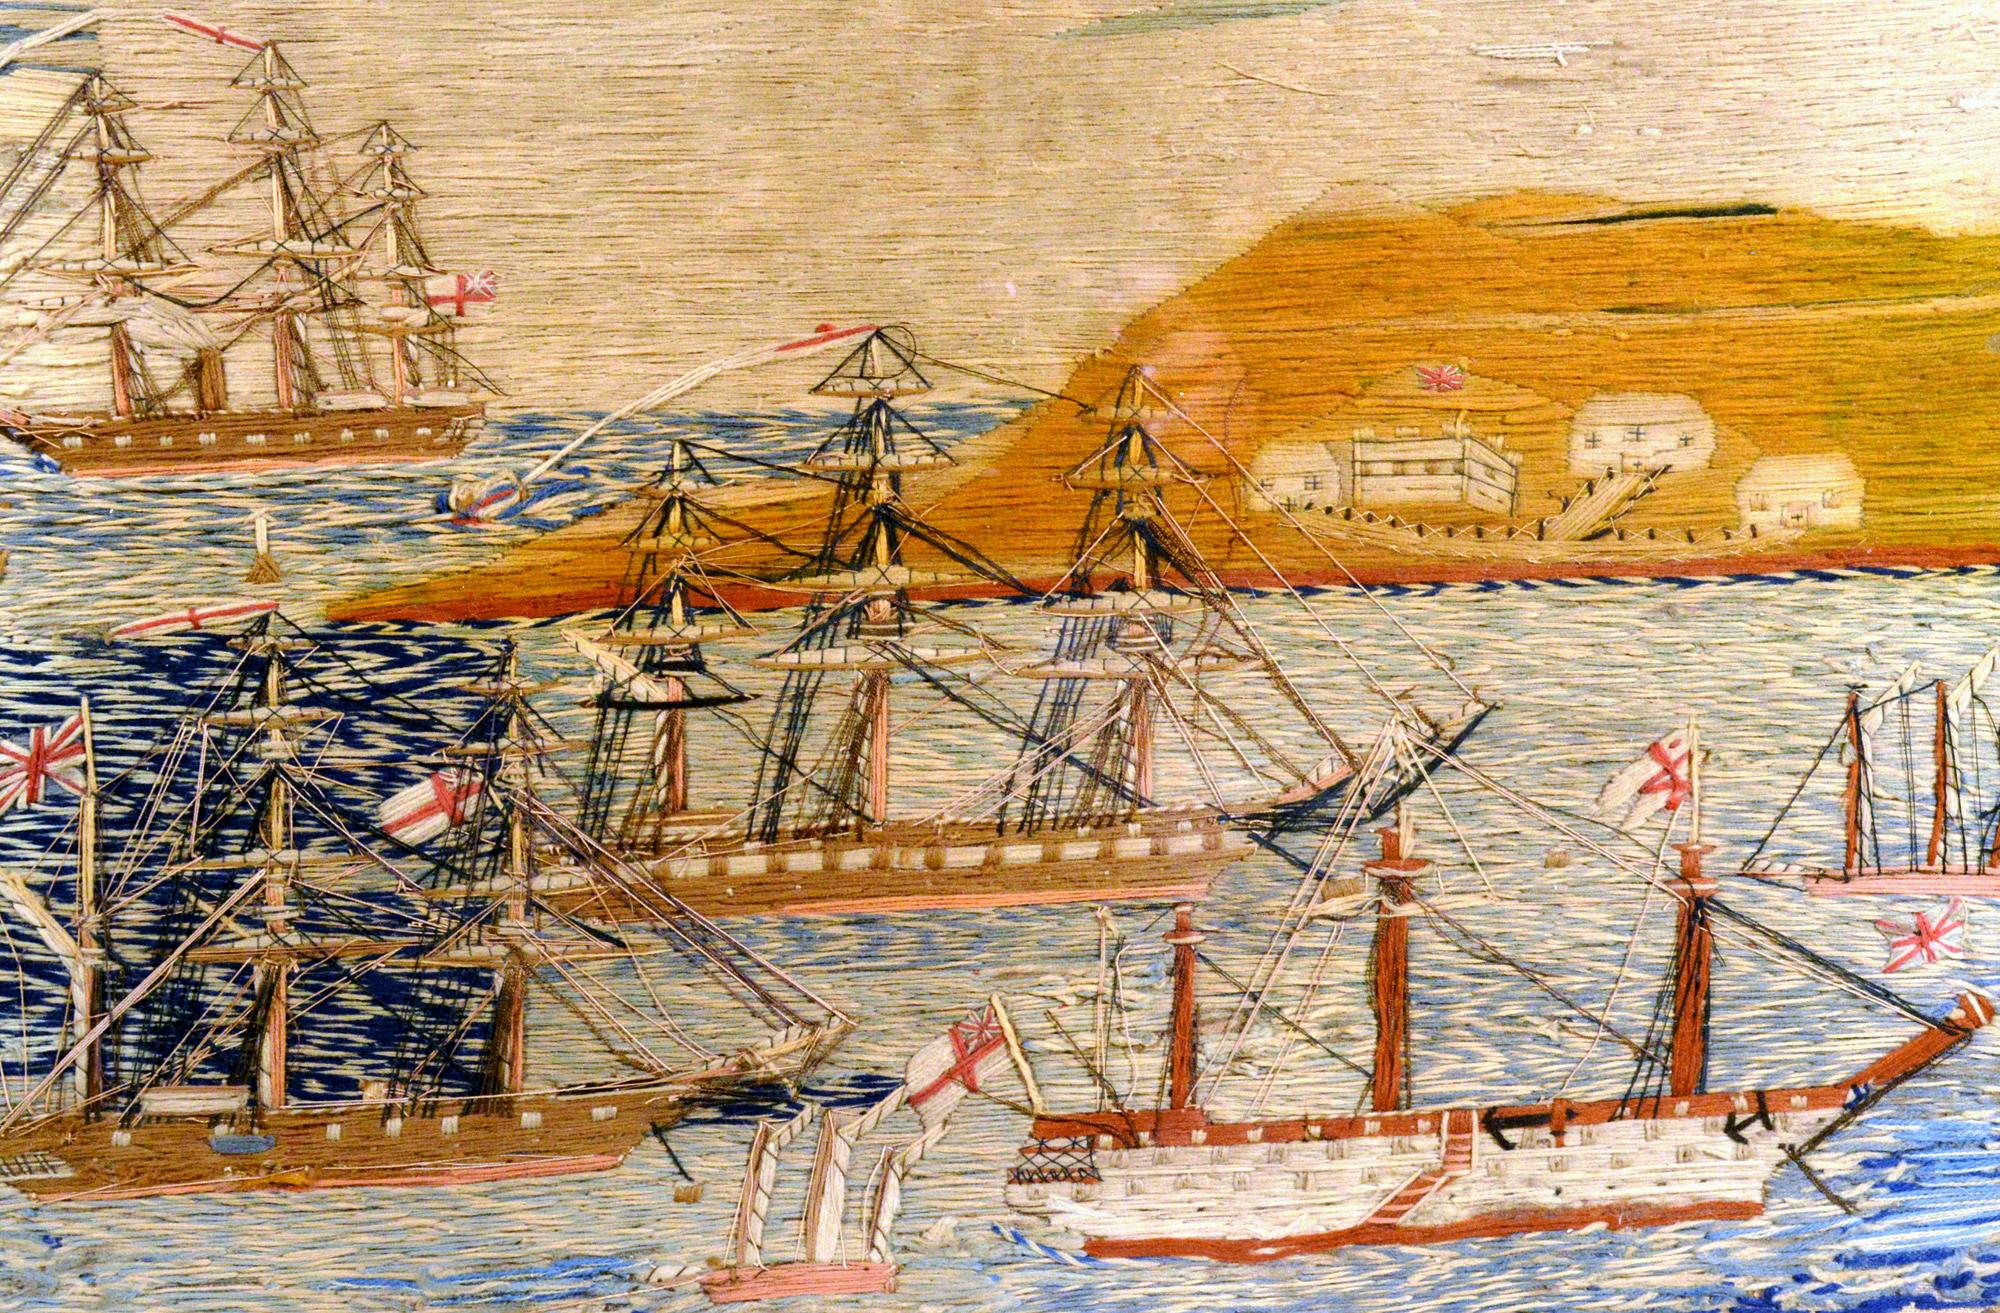 English sailor's woolwork or woolie with multiple ships in a bay, 
circa 1875.

The sailor's woolwork (Woolie) with good color and detail depicts five ships in a bay, some anchored and some sailing. Further out to sea is a large ship rounding a